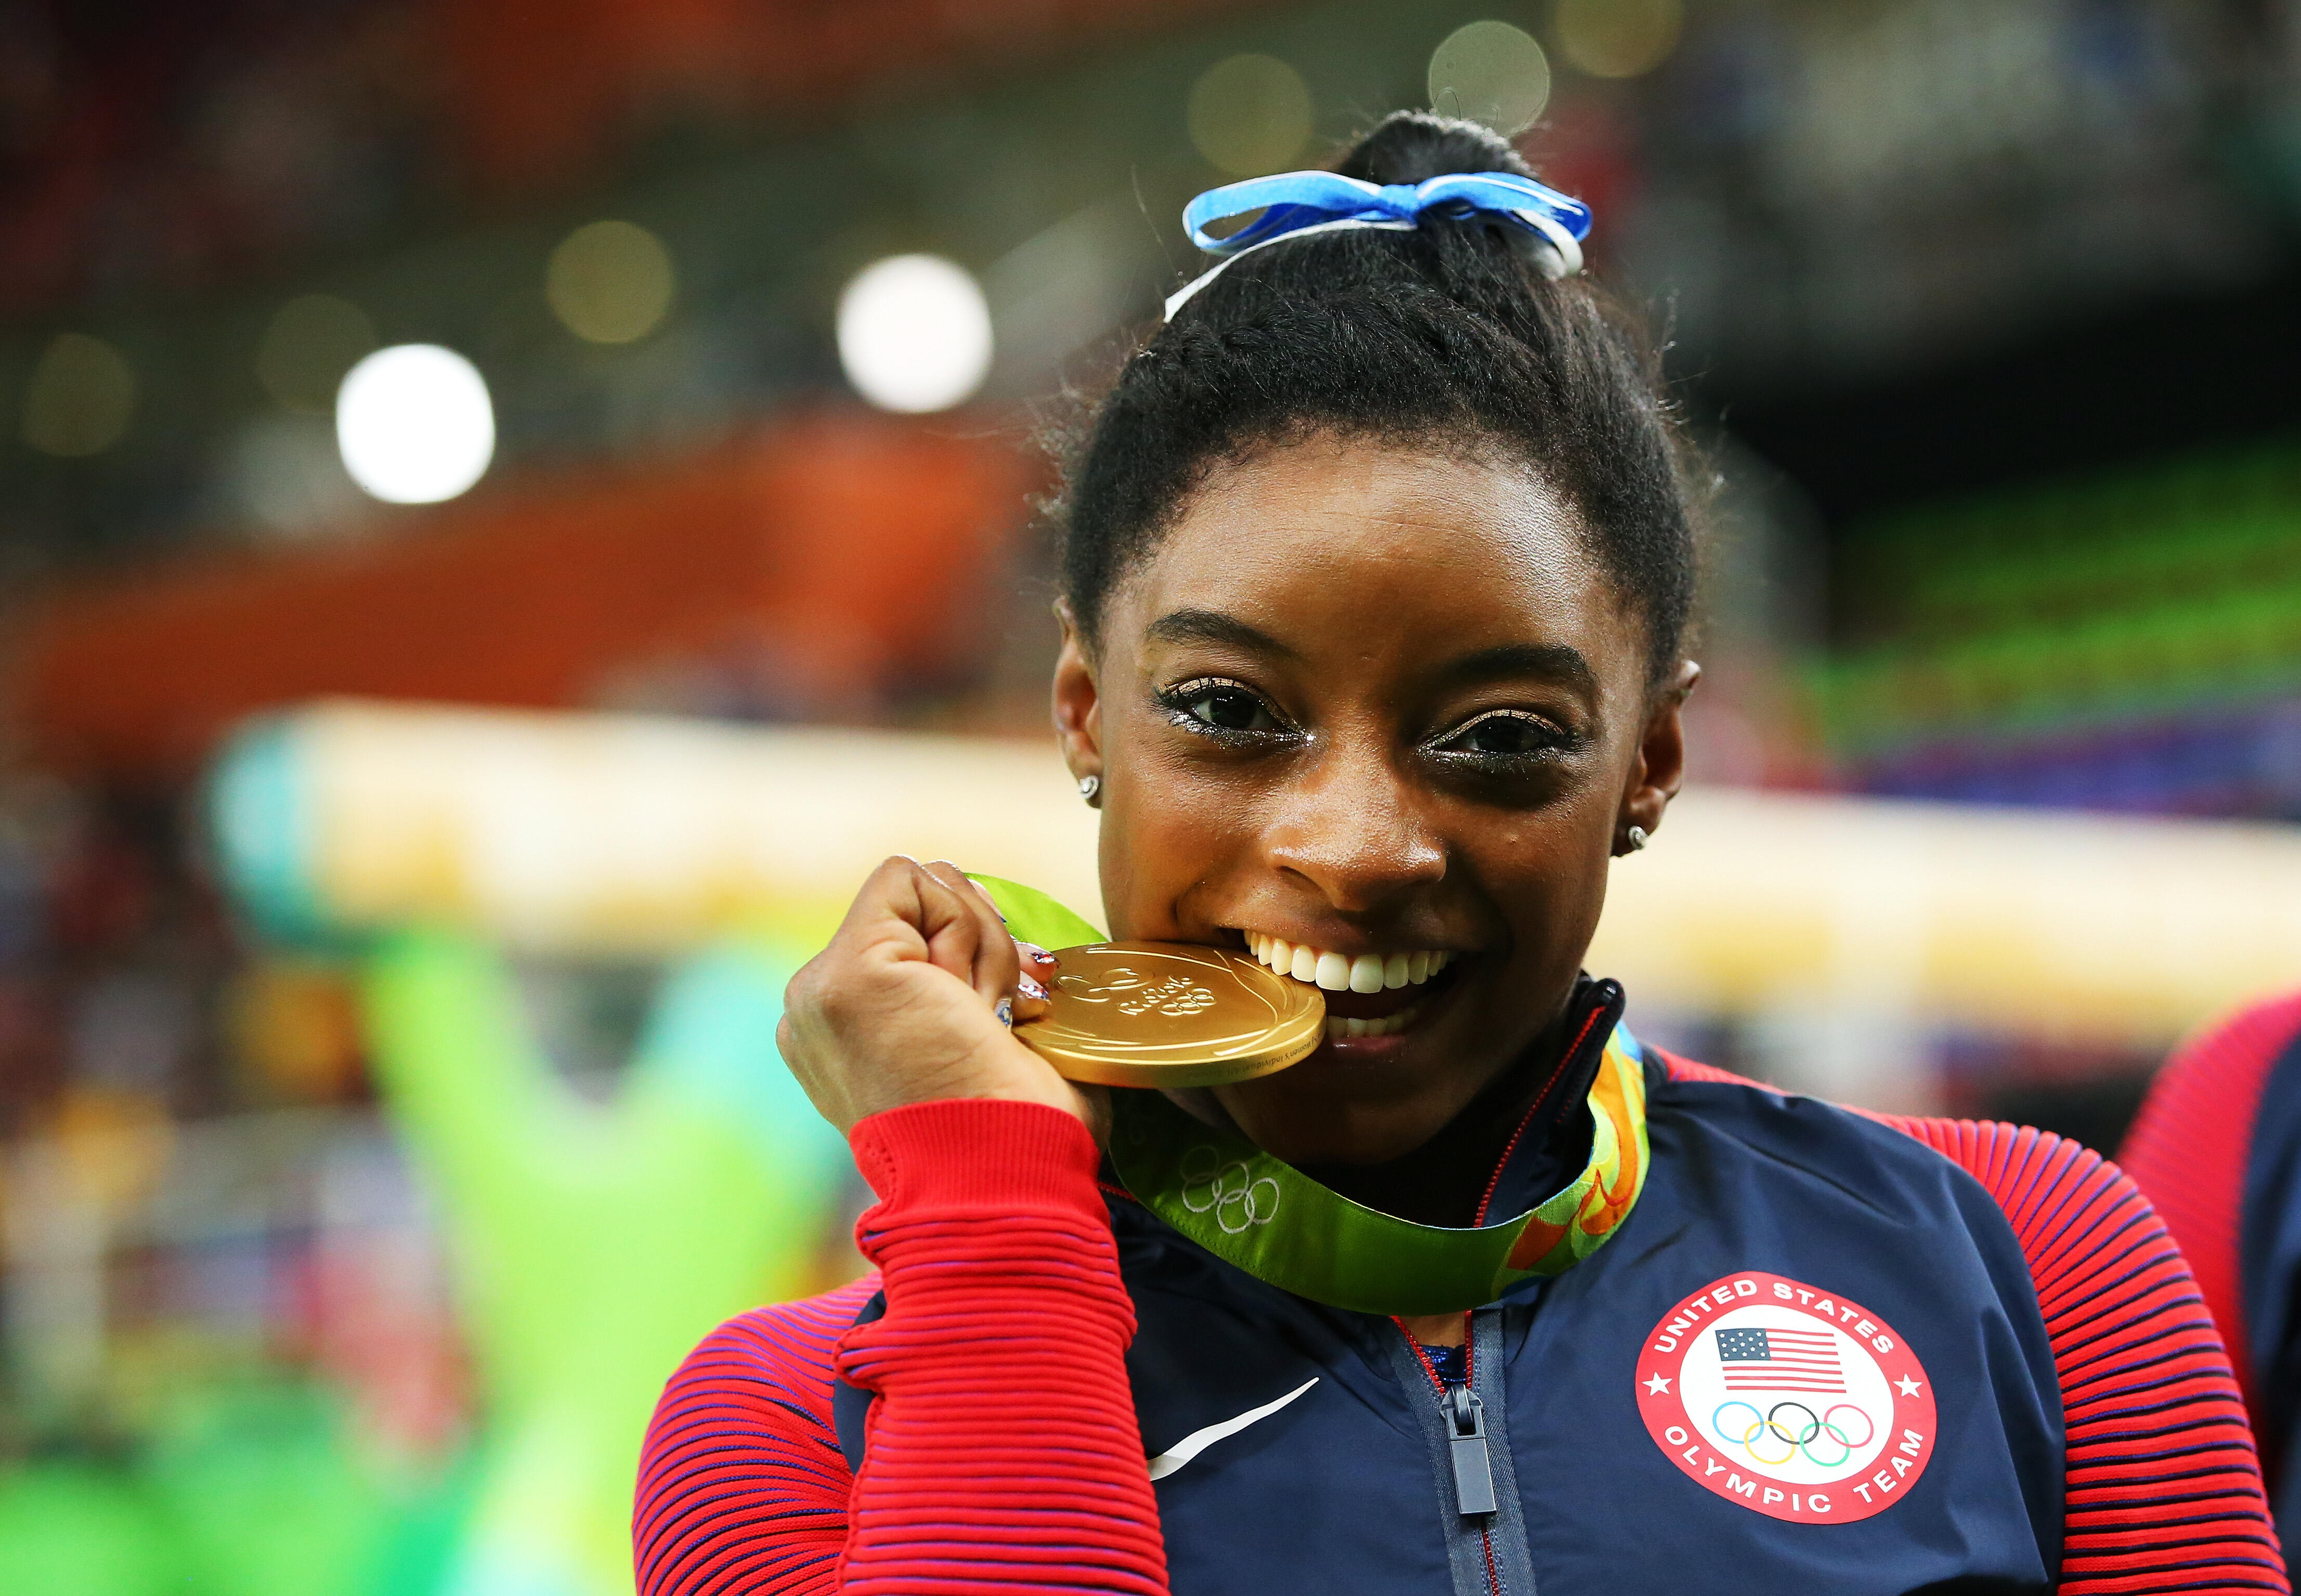 RIO DE JANEIRO, BRAZIL - AUGUST 11:  Gold medalist Simone Biles of the United States poses for photographs after the medal ceremony for the Women's Individual All Around on Day 6 of the 2016 Rio Olympics at Rio Olympic Arena on August 11, 2016 in Rio de J